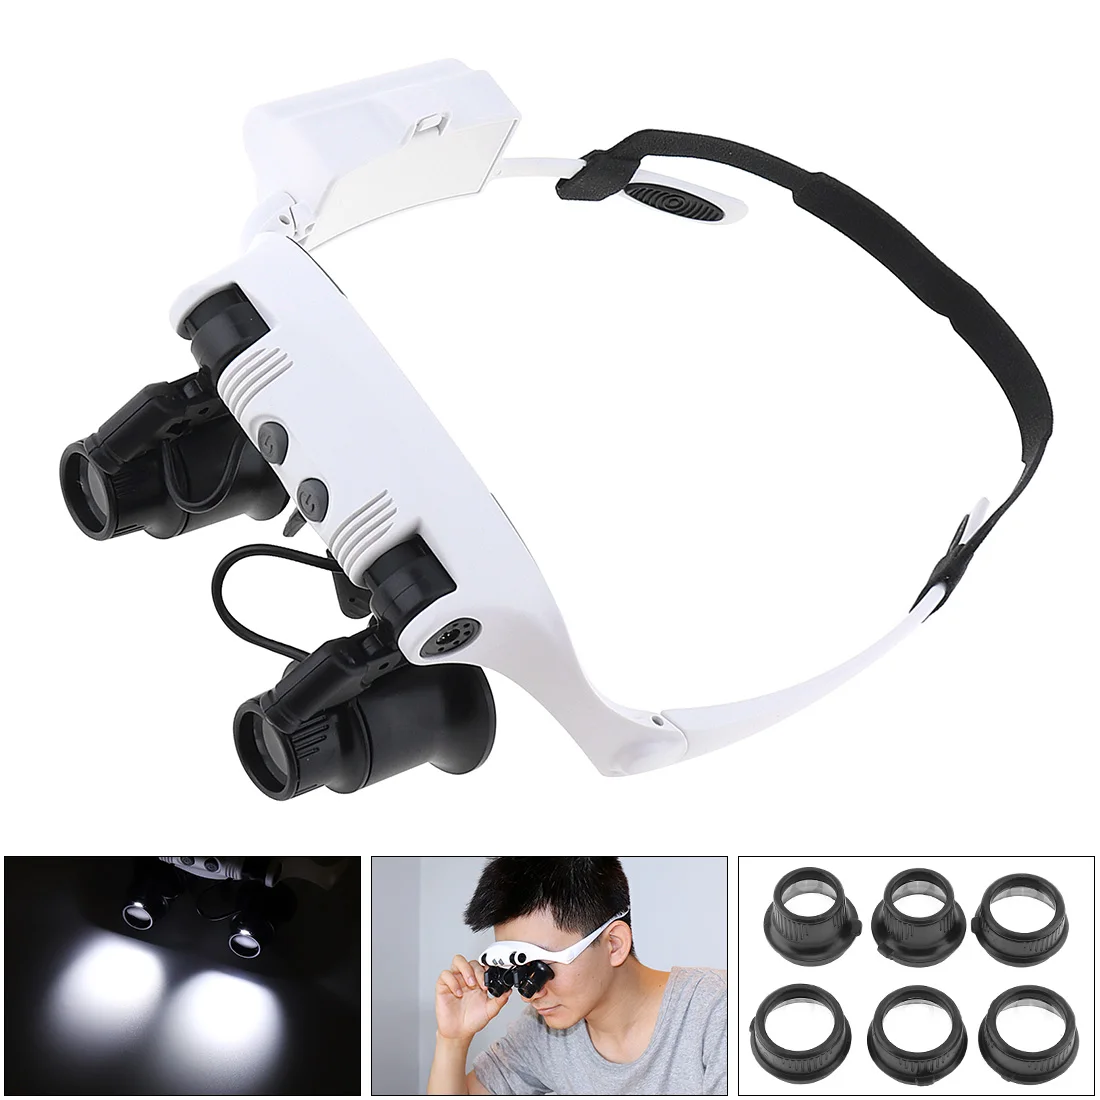 25X Adjustable Jewelry Magnifying Glasses LED Light Lamp Head Loupe Headband Magnifier Eye Glasses Optical 8 Lens for Repairing